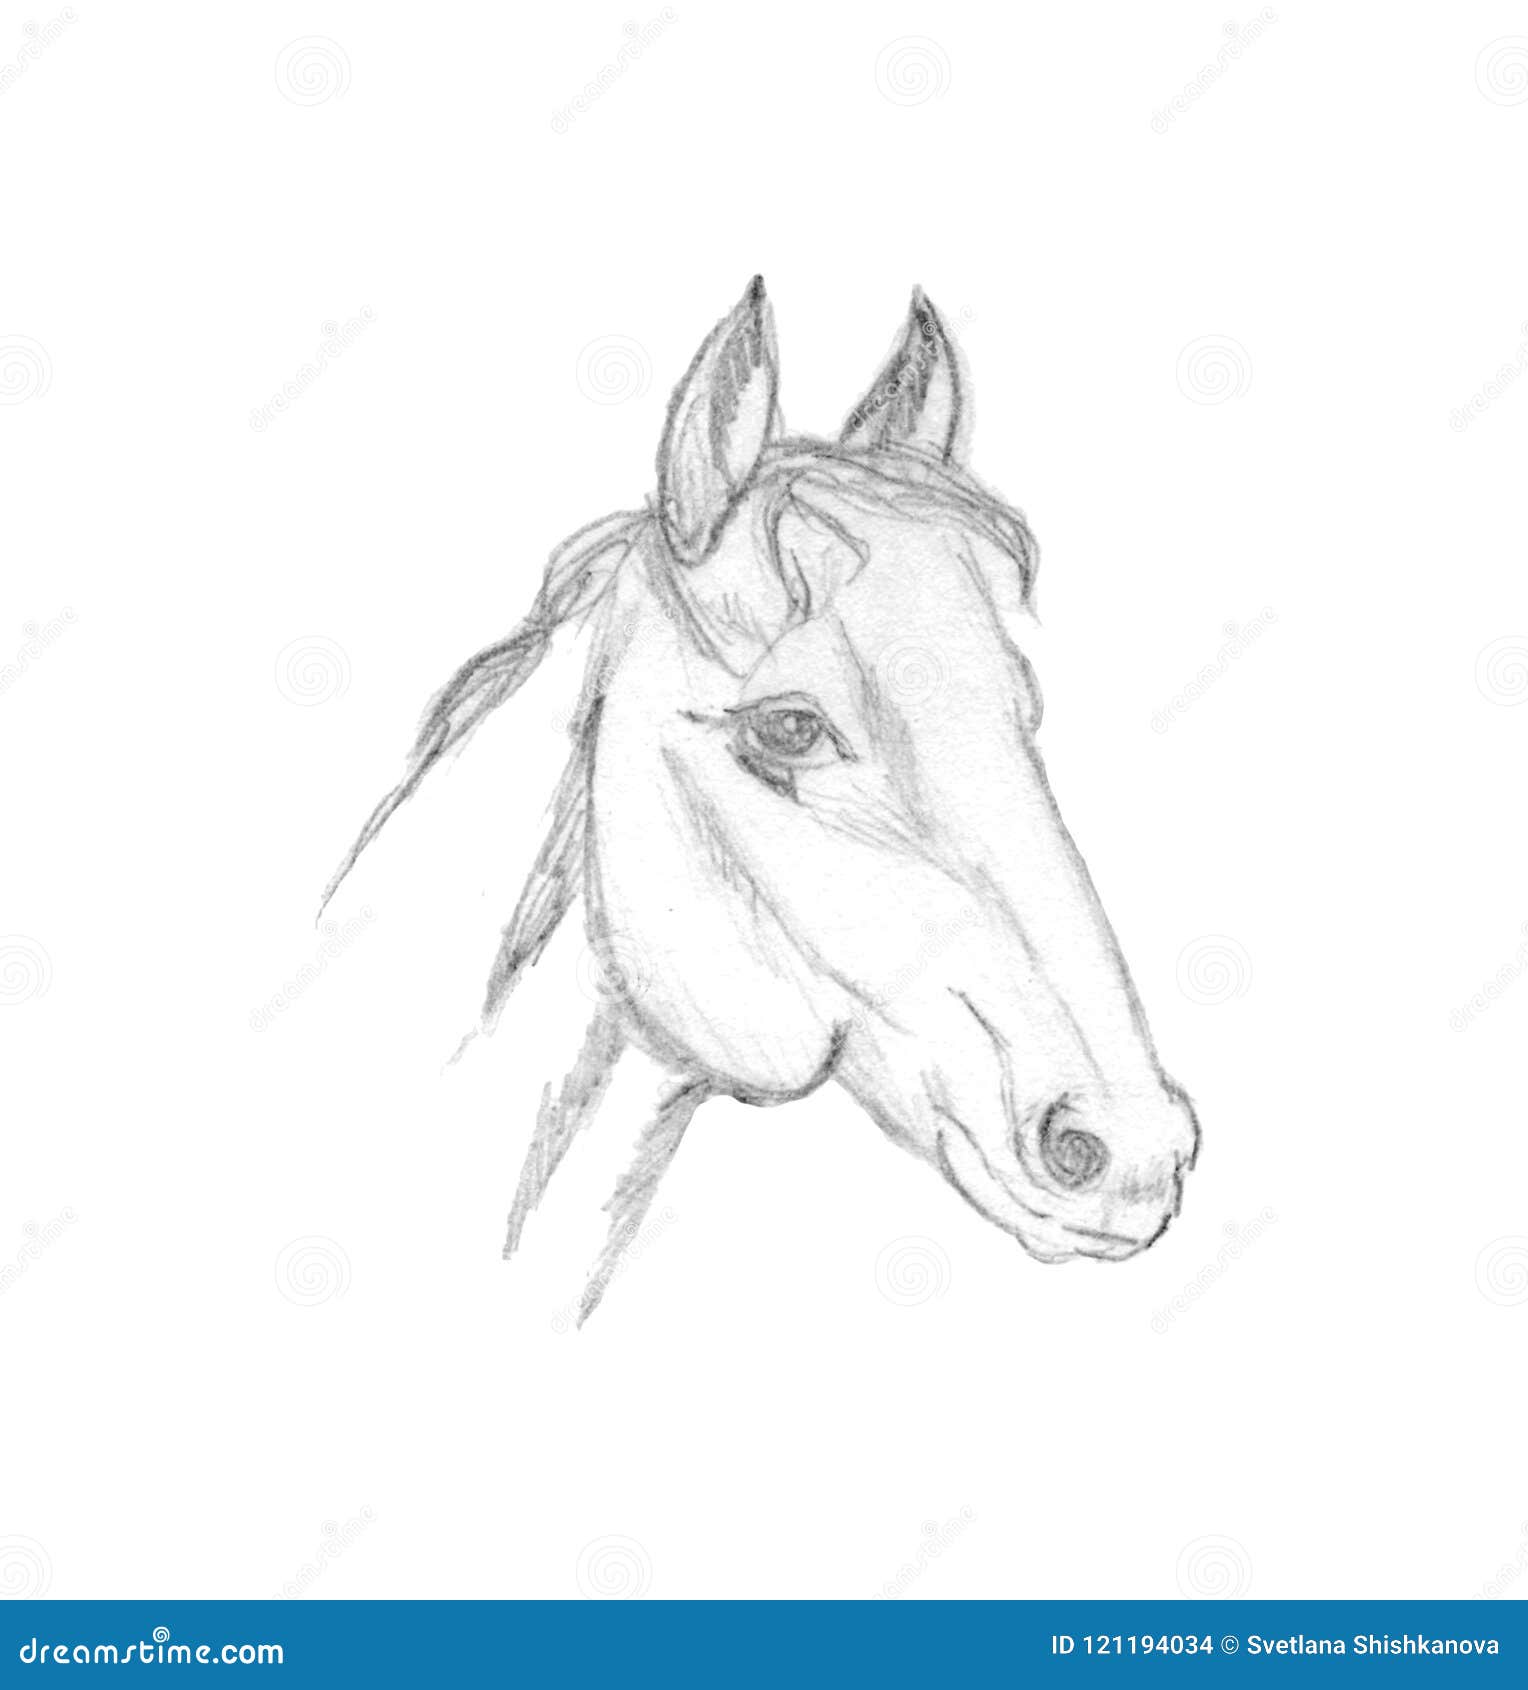 How To Draw Horse Heads, Step by Step, Drawing Guide, by Dawn - DragoArt